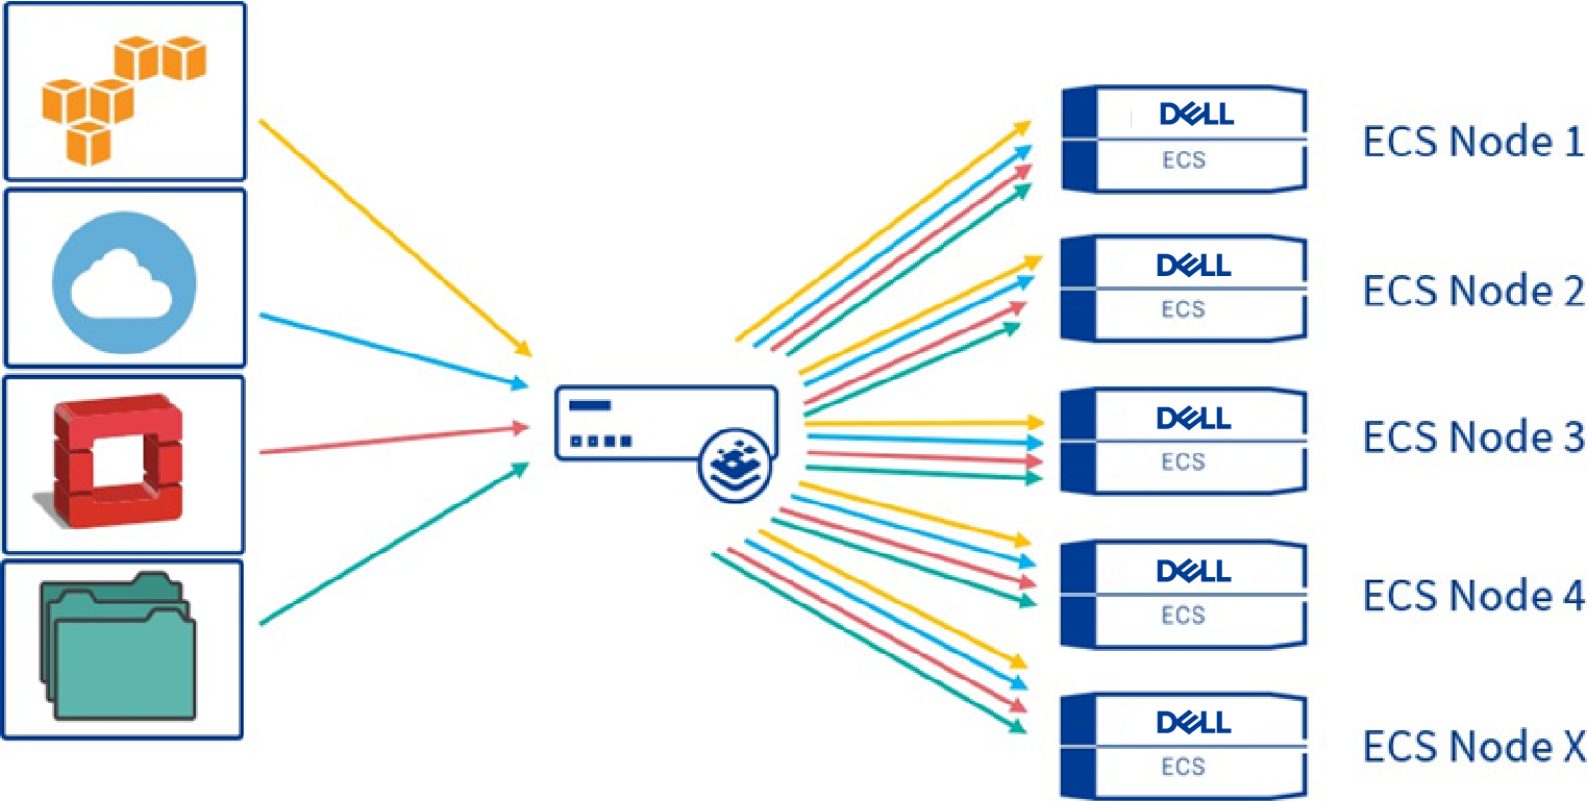 Applications utilize storage through a single Kemp load balancer that directs data traffic across the nodes to a single  Dell ECS cluster.